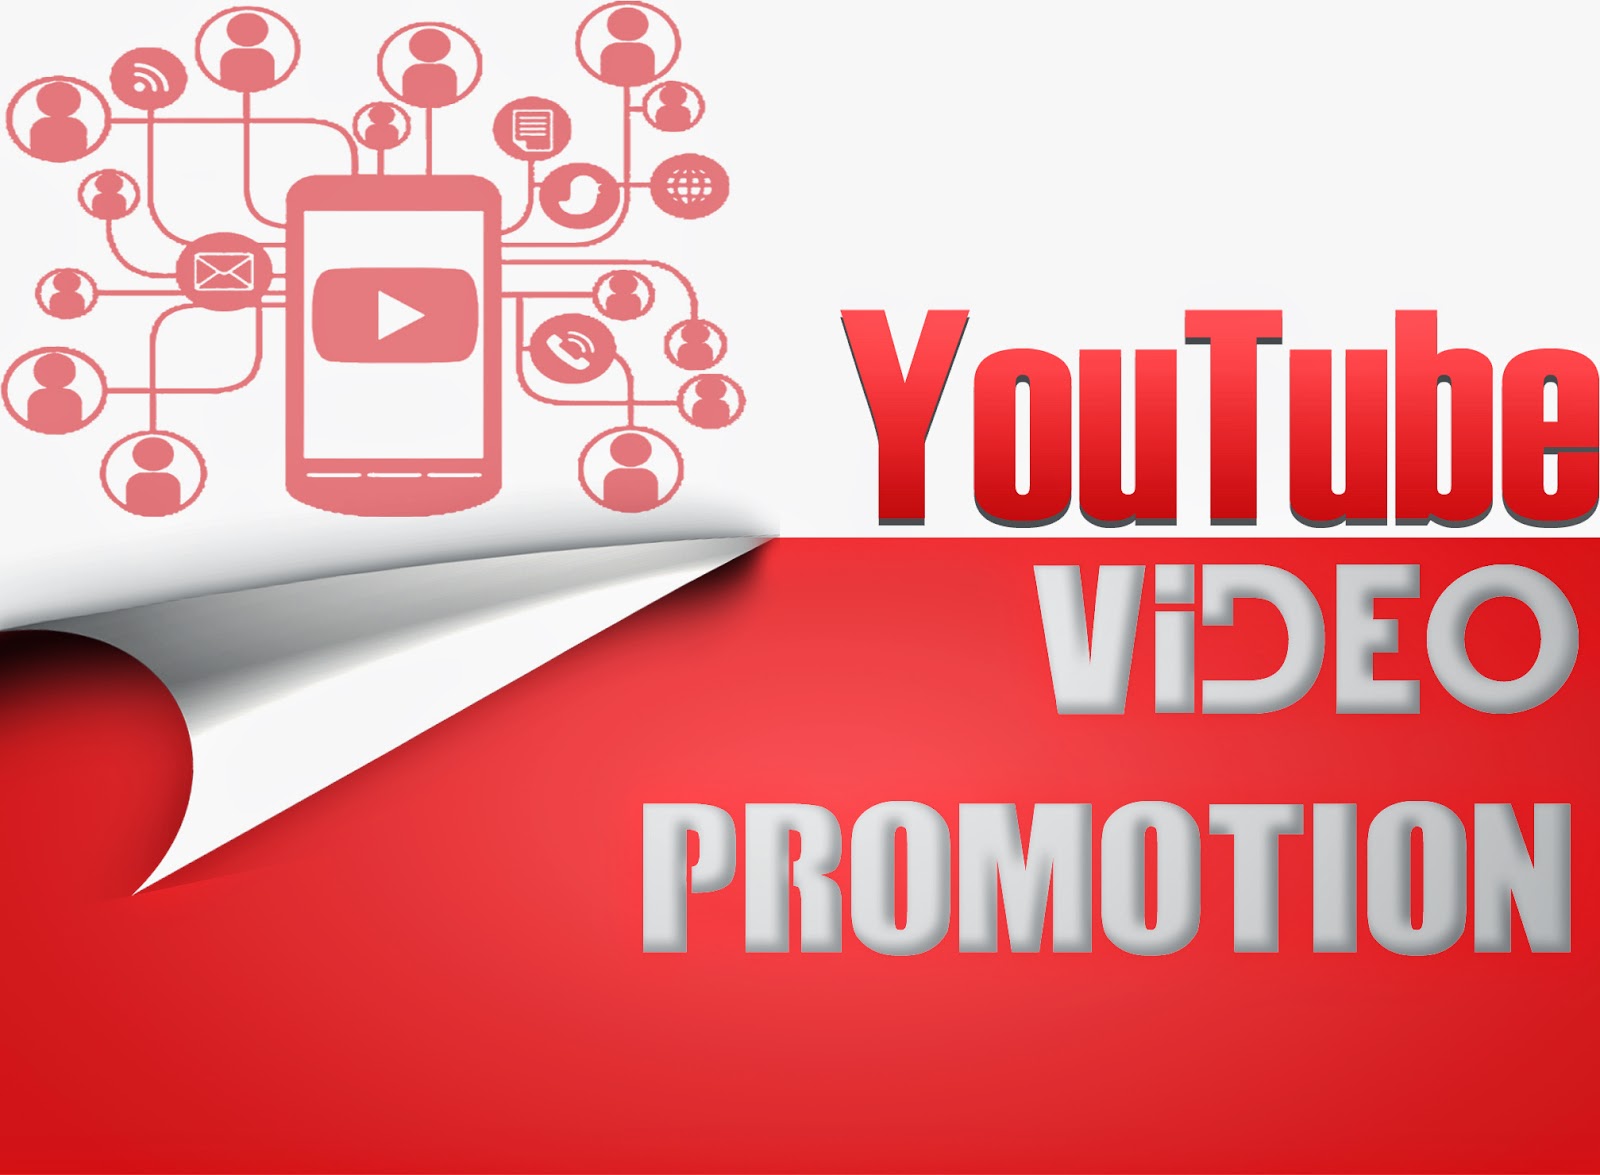 provide you video Promotion services 